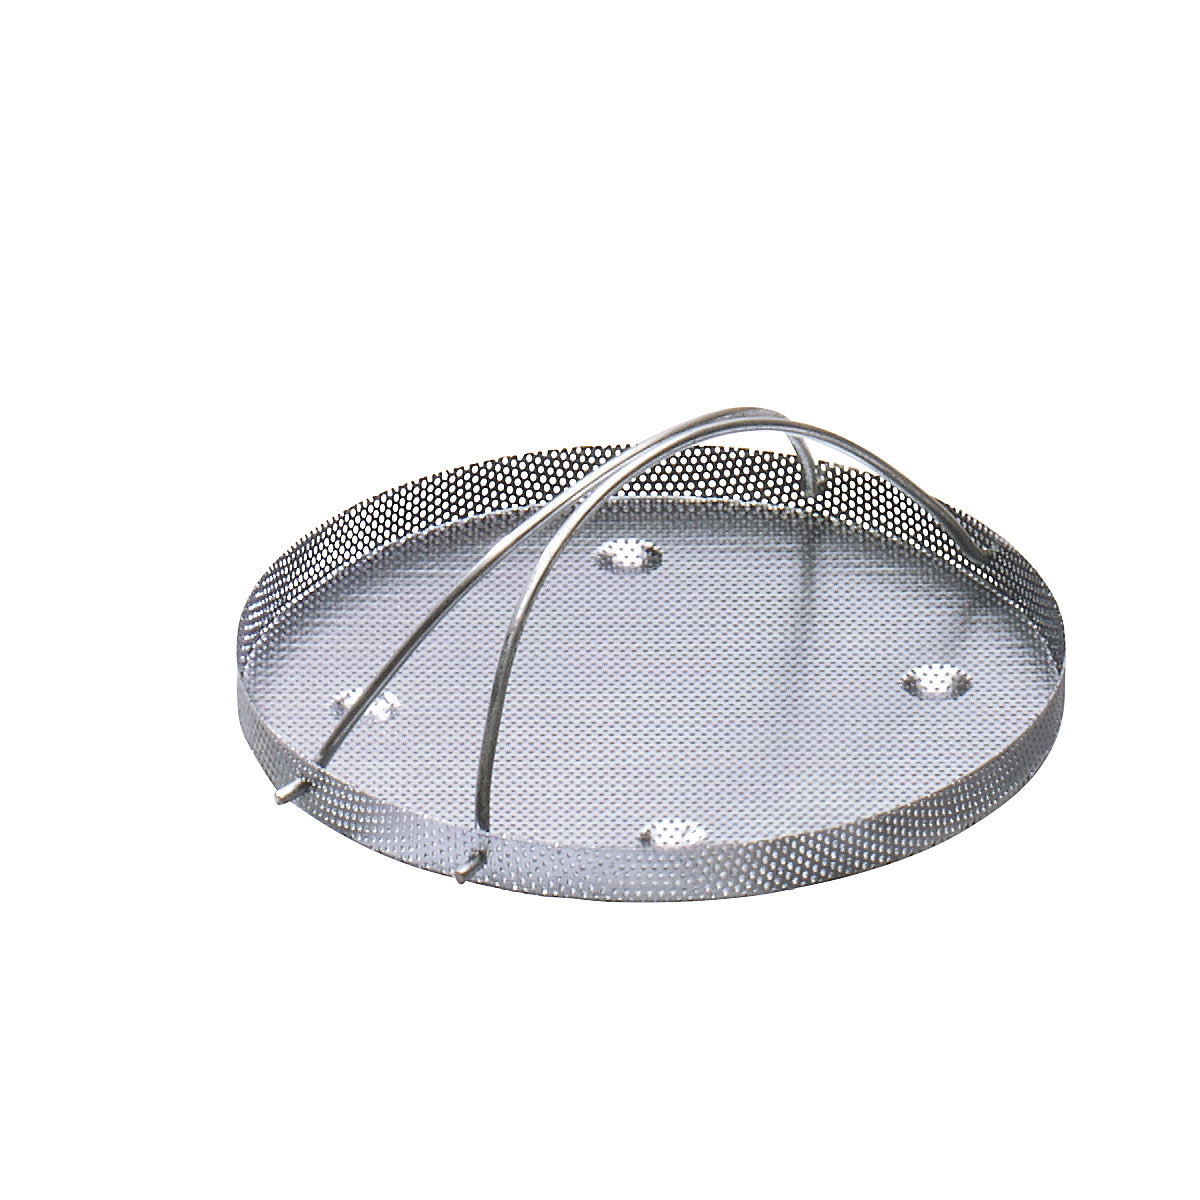 Parts basket with perforated base – Justrite